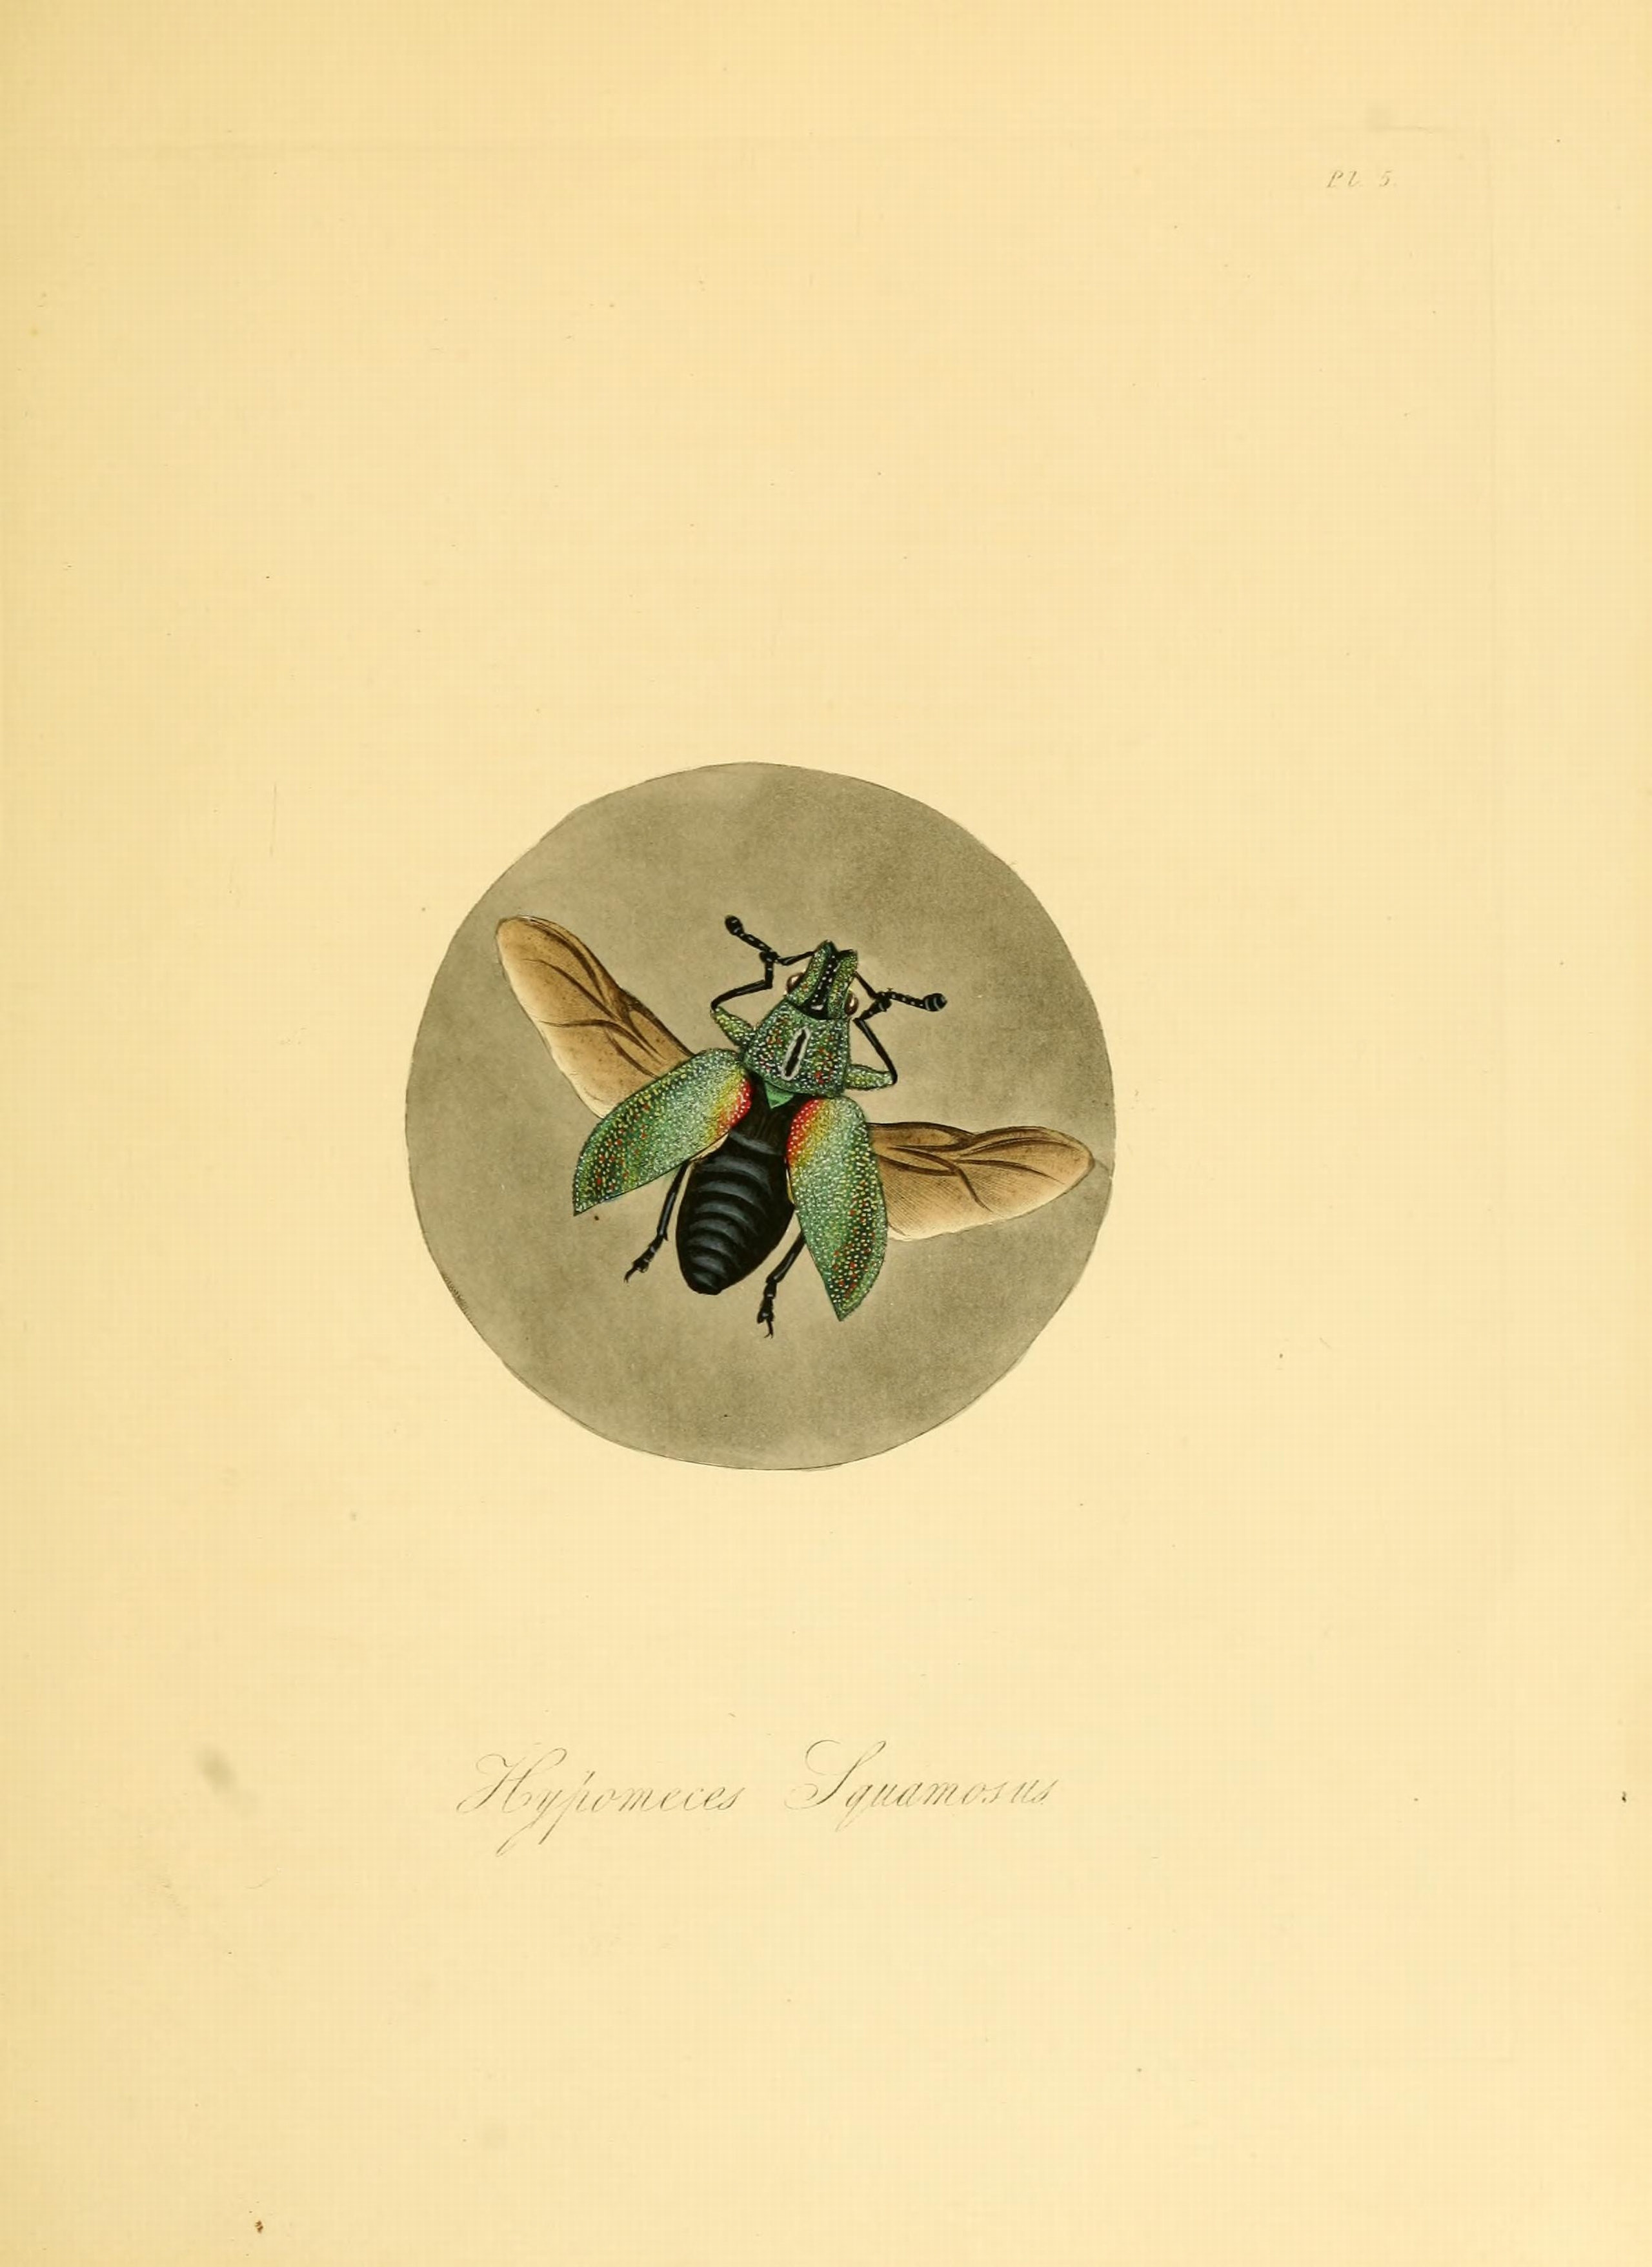 Donovan - Insects of China, 1838 - pl 05 (from 1842 edition)